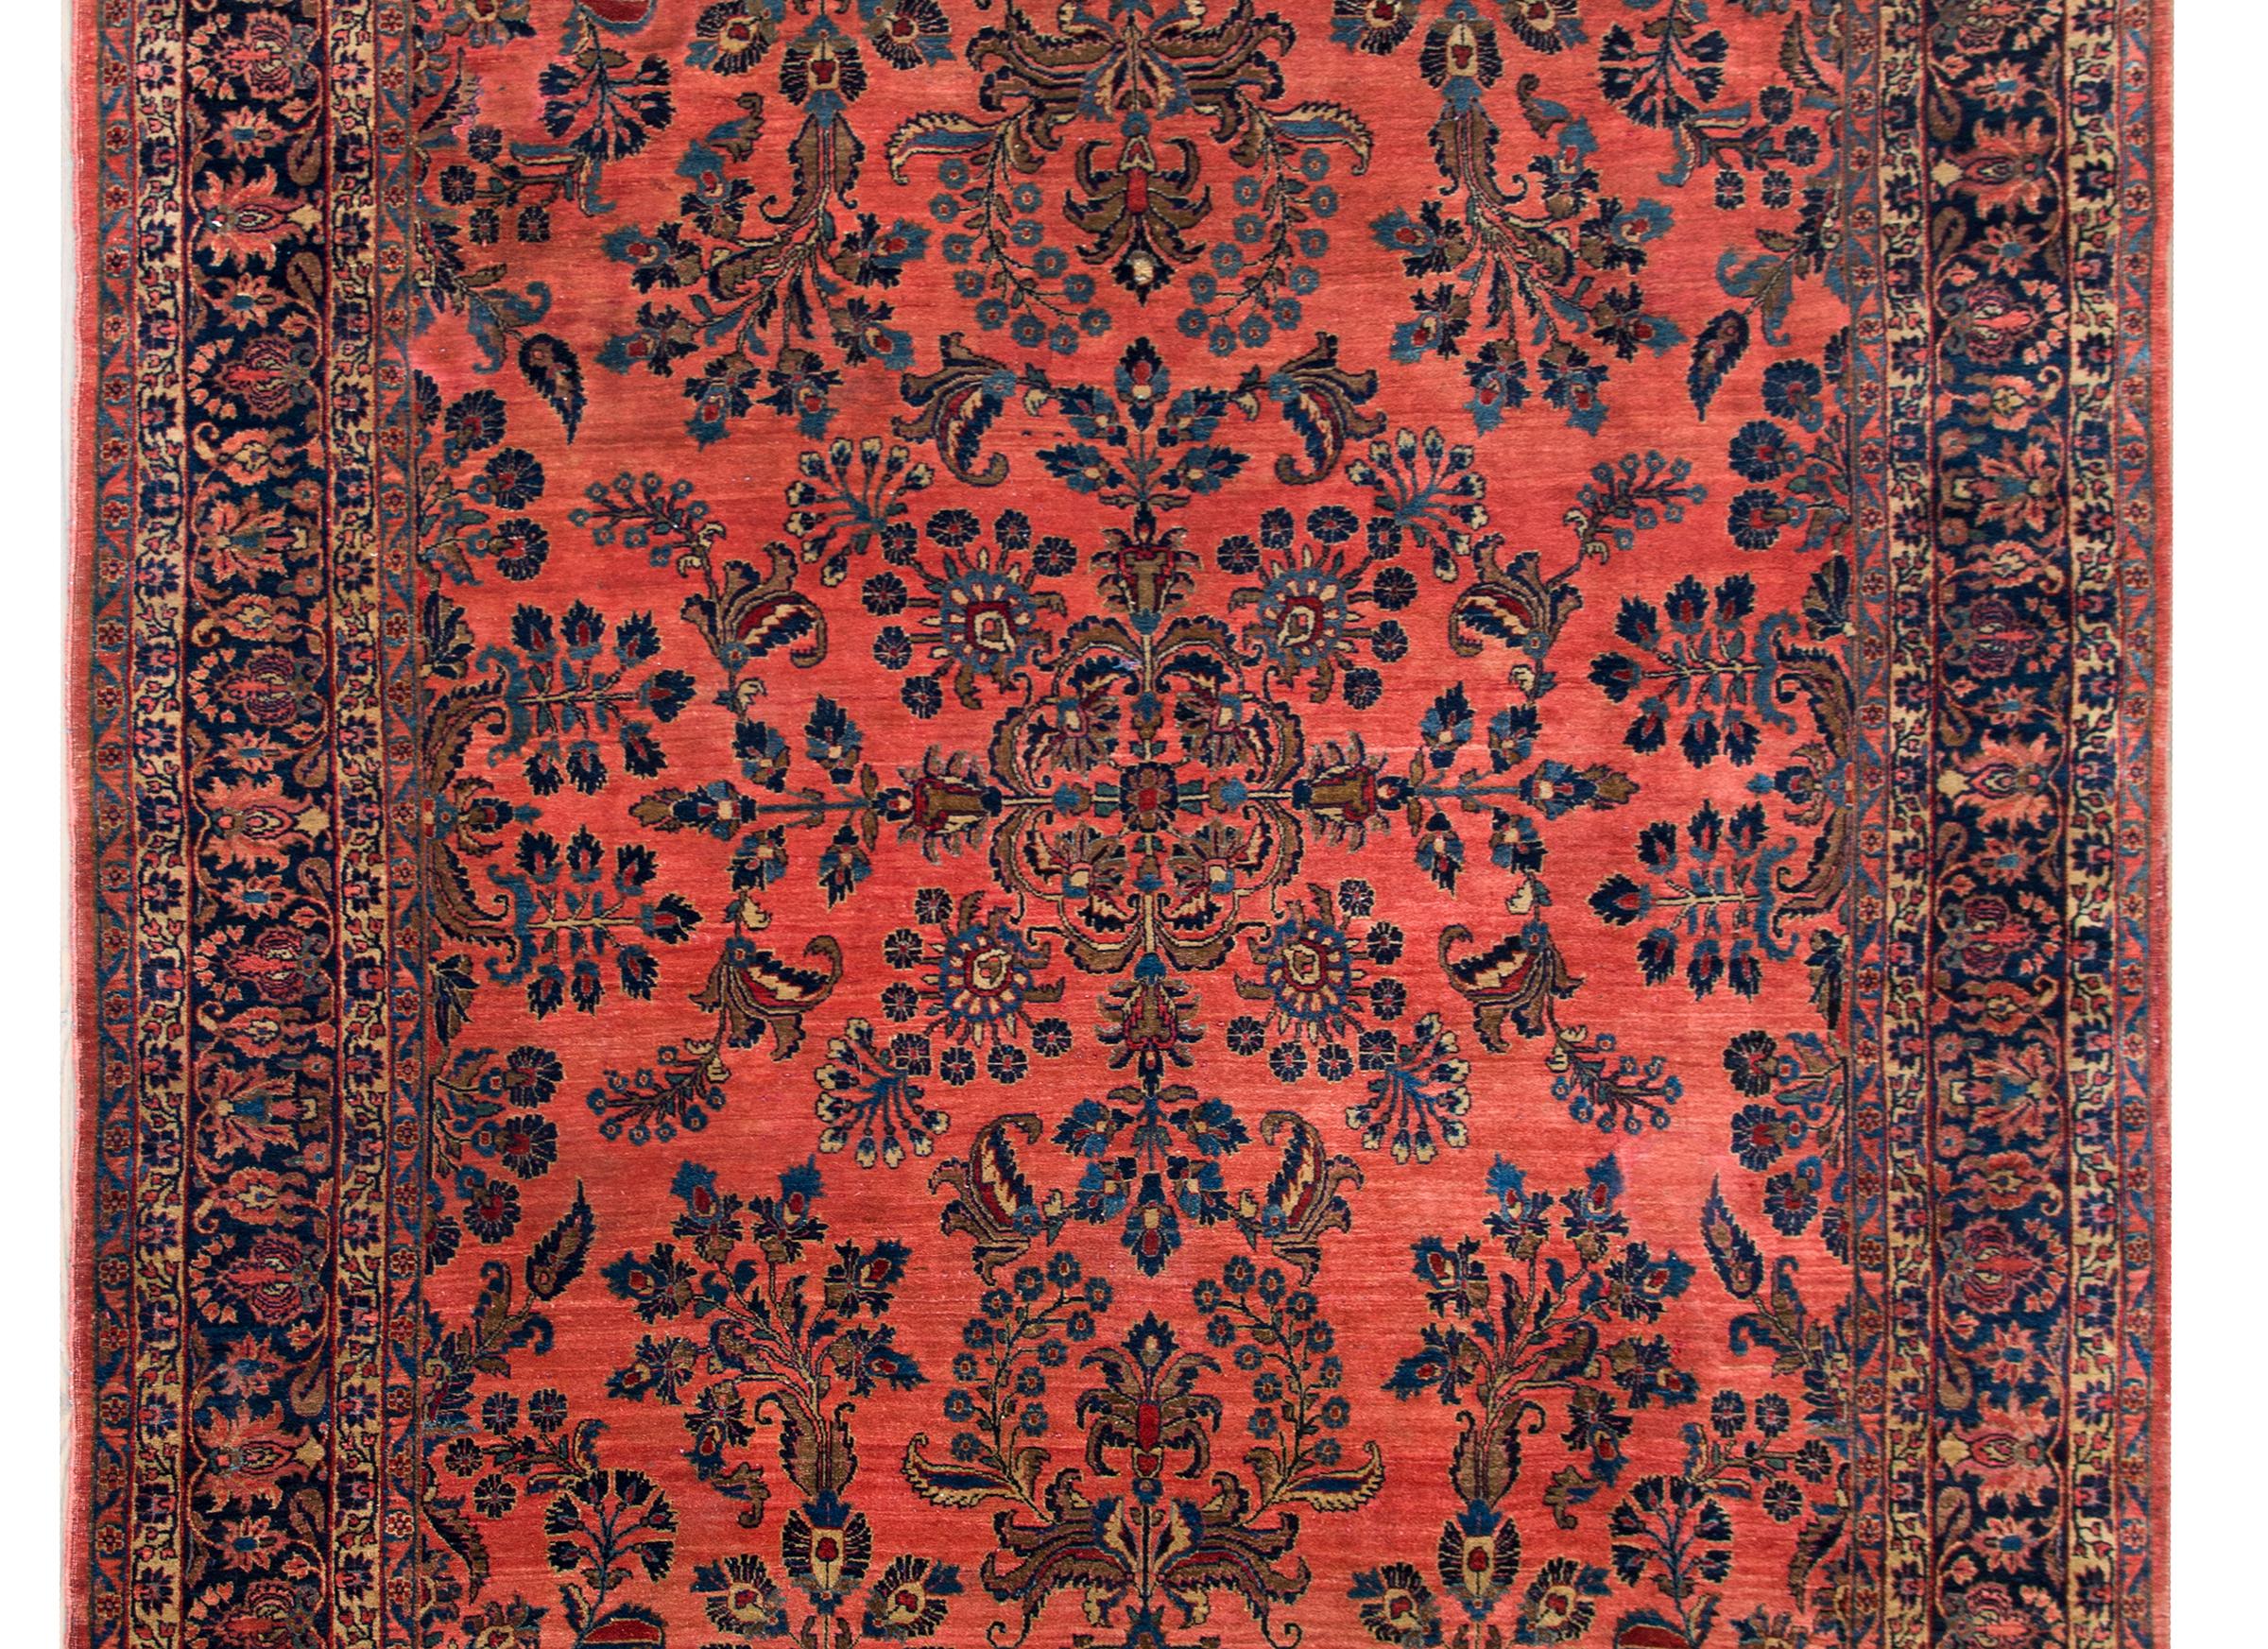 A gorgeous early 20th century Persian Sarouk Mohajeran rug with a mirrored floral pattern with beautifully rendered flowers and scrolling vines all woven in light and dark indigo, cranberry, and cream, set against a salmon colored background, and